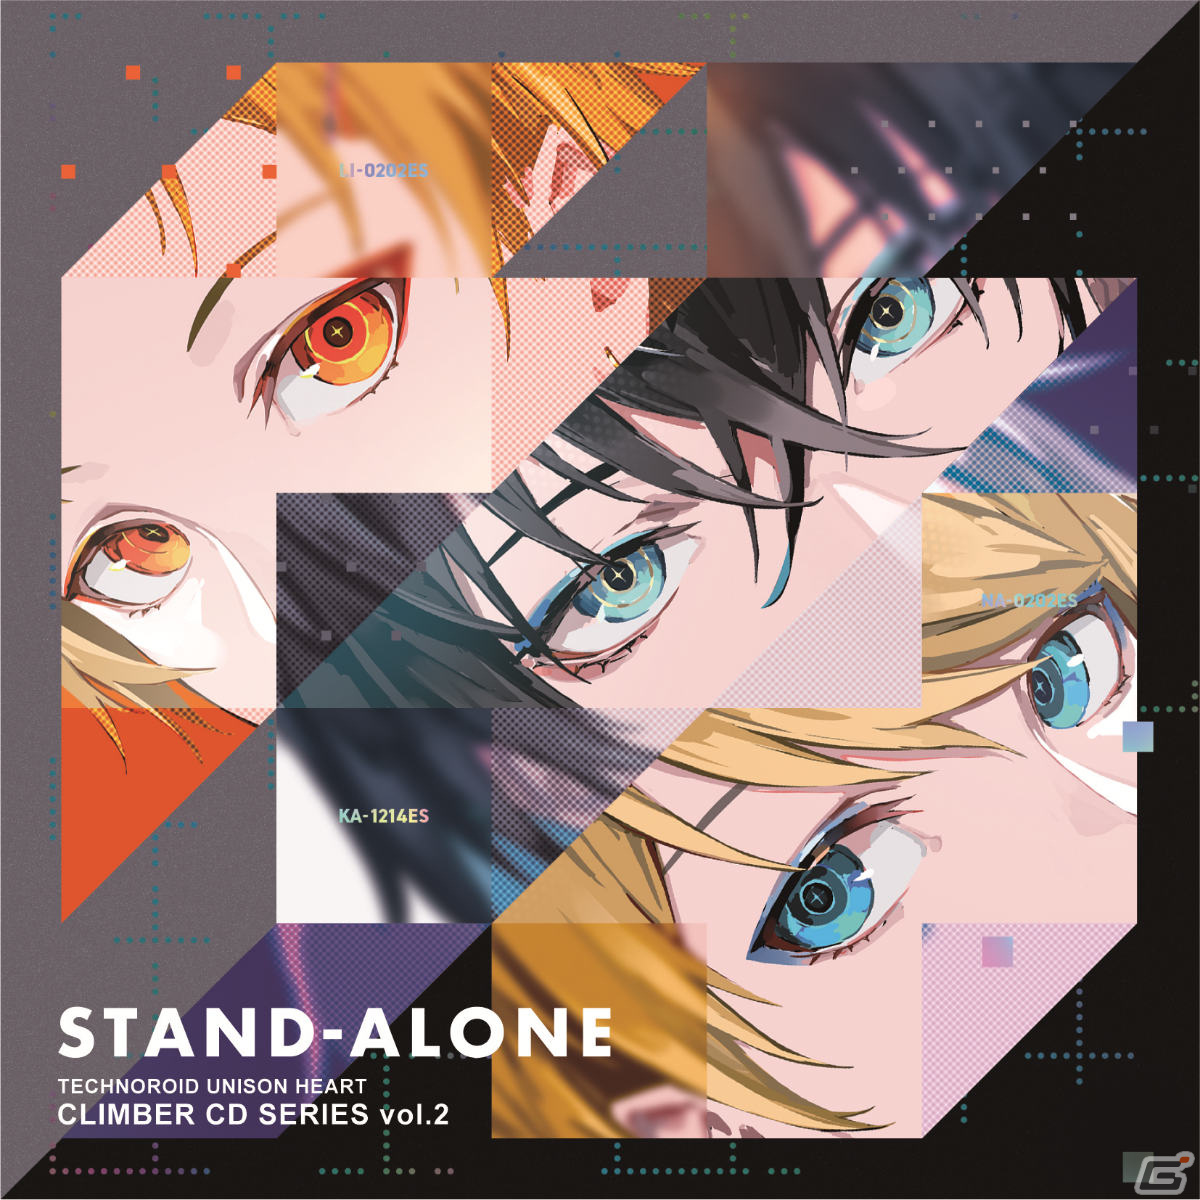 Cover art for『STAND-ALONE - Not Standing Alone』from the release『TECHNOROID UNISON HEART CLIMBER CD SERIES vol.2